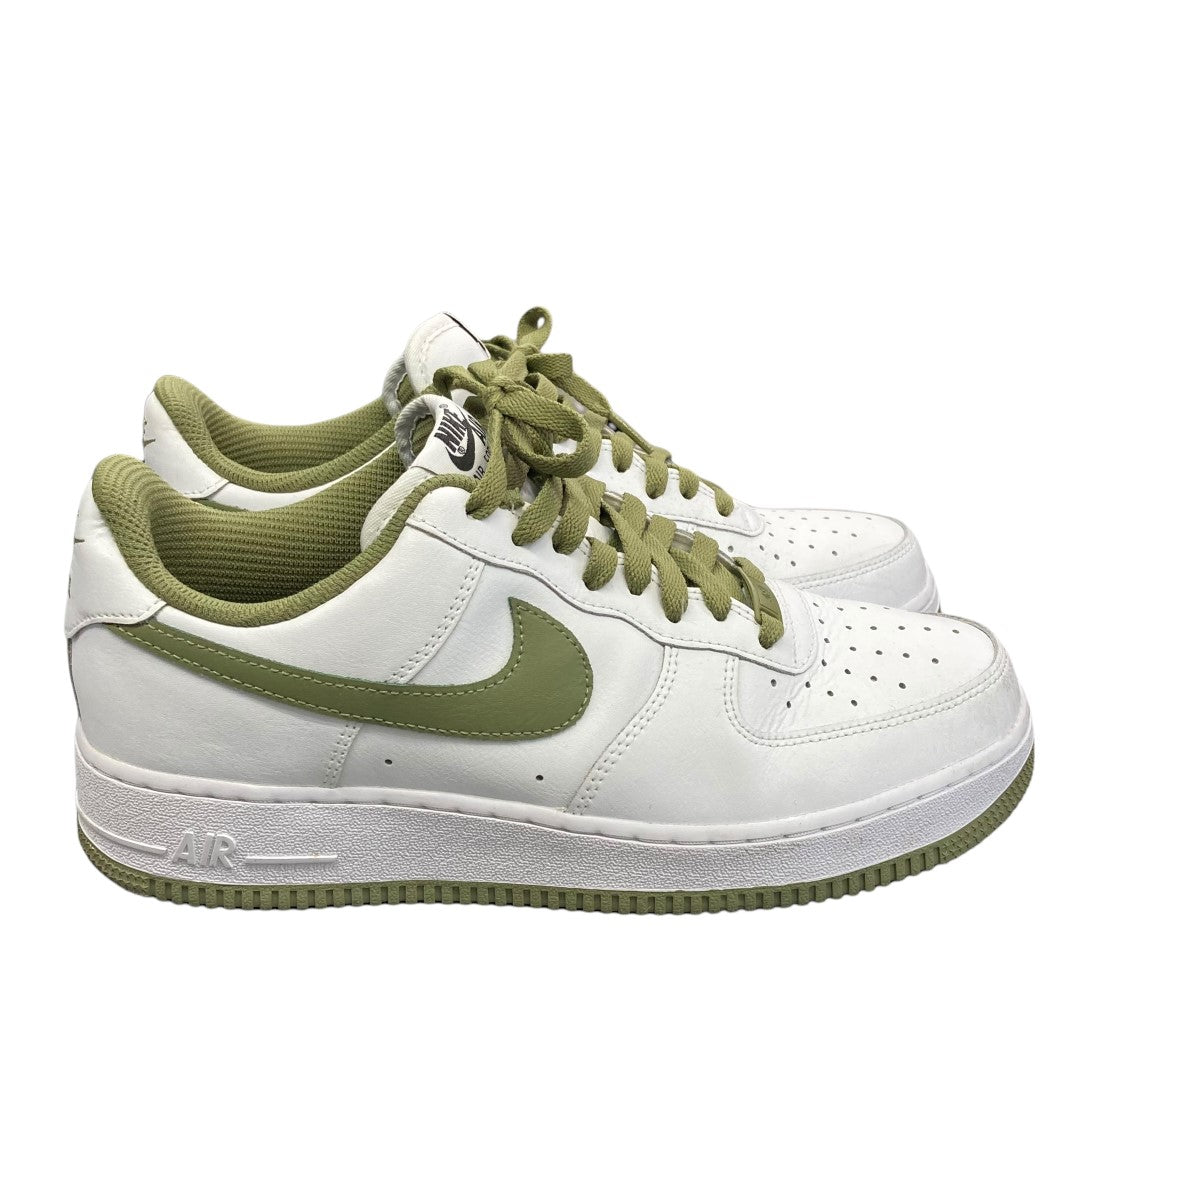 NIKE(ナイキ) AIR FORCE 1 By YouローカットスニーカーCT7875-994 